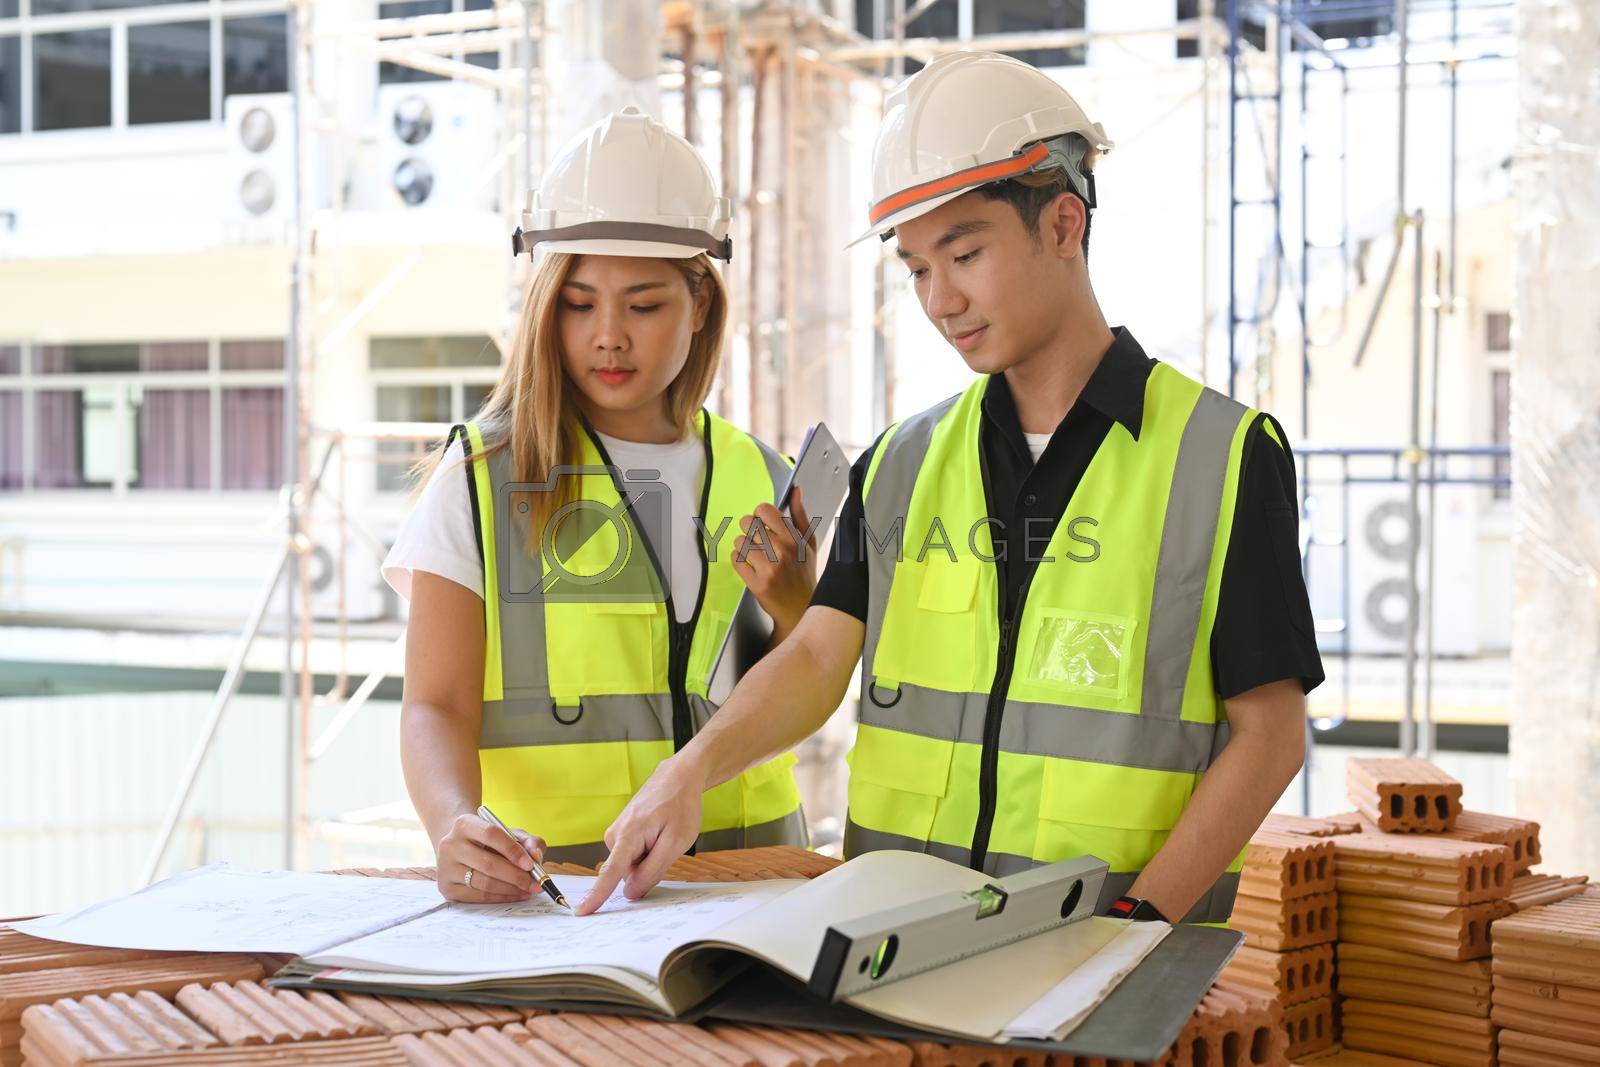 Royalty free image of Civil engineer and specialists working, checking plan together at construction site. Industry, Engineer, construction concept by prathanchorruangsak